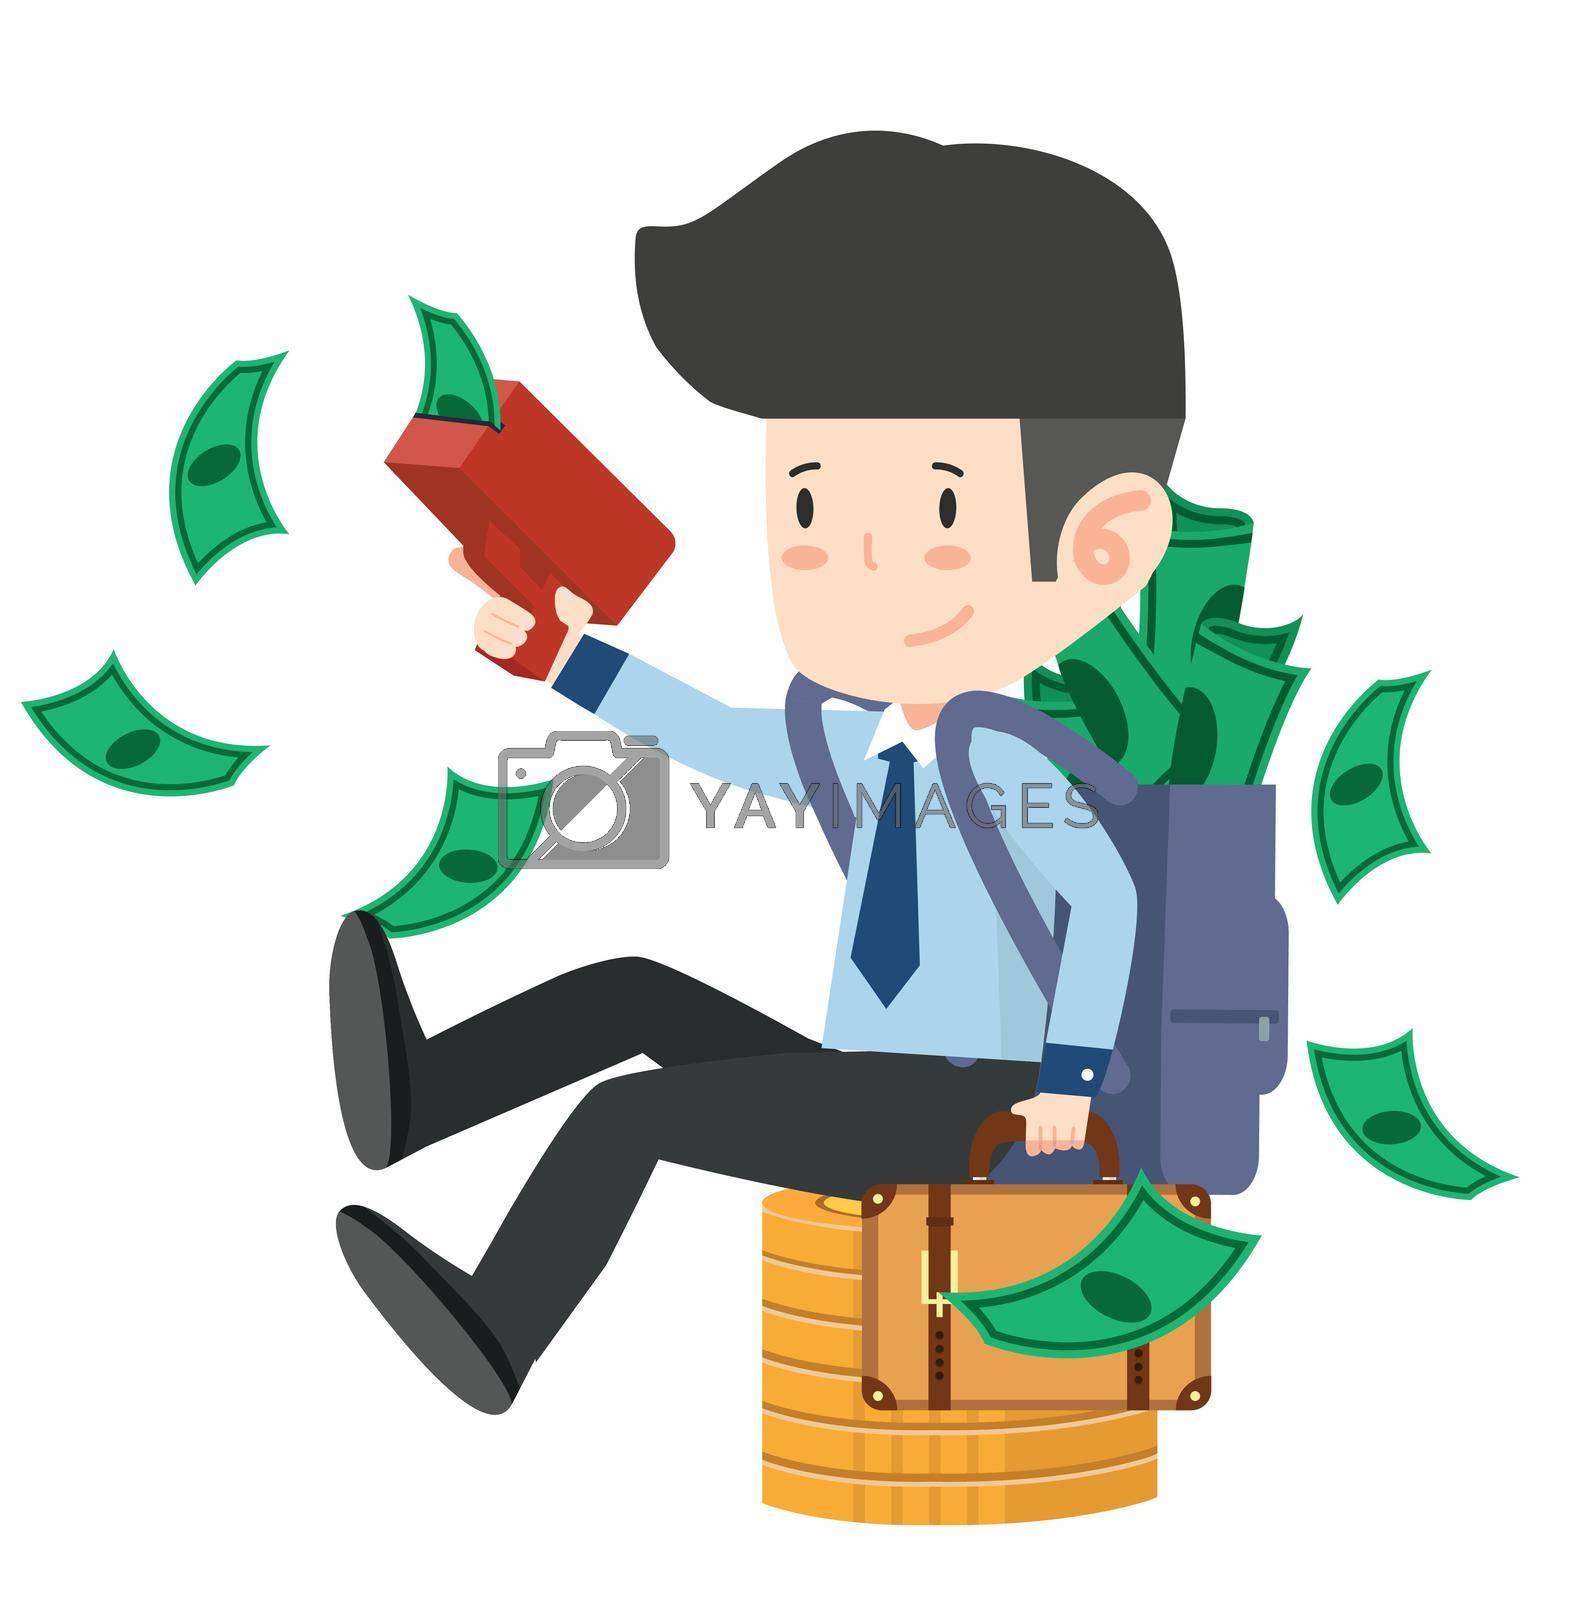 Royalty free image of businessman  With Money Gun Cartoon concept by focus_bell